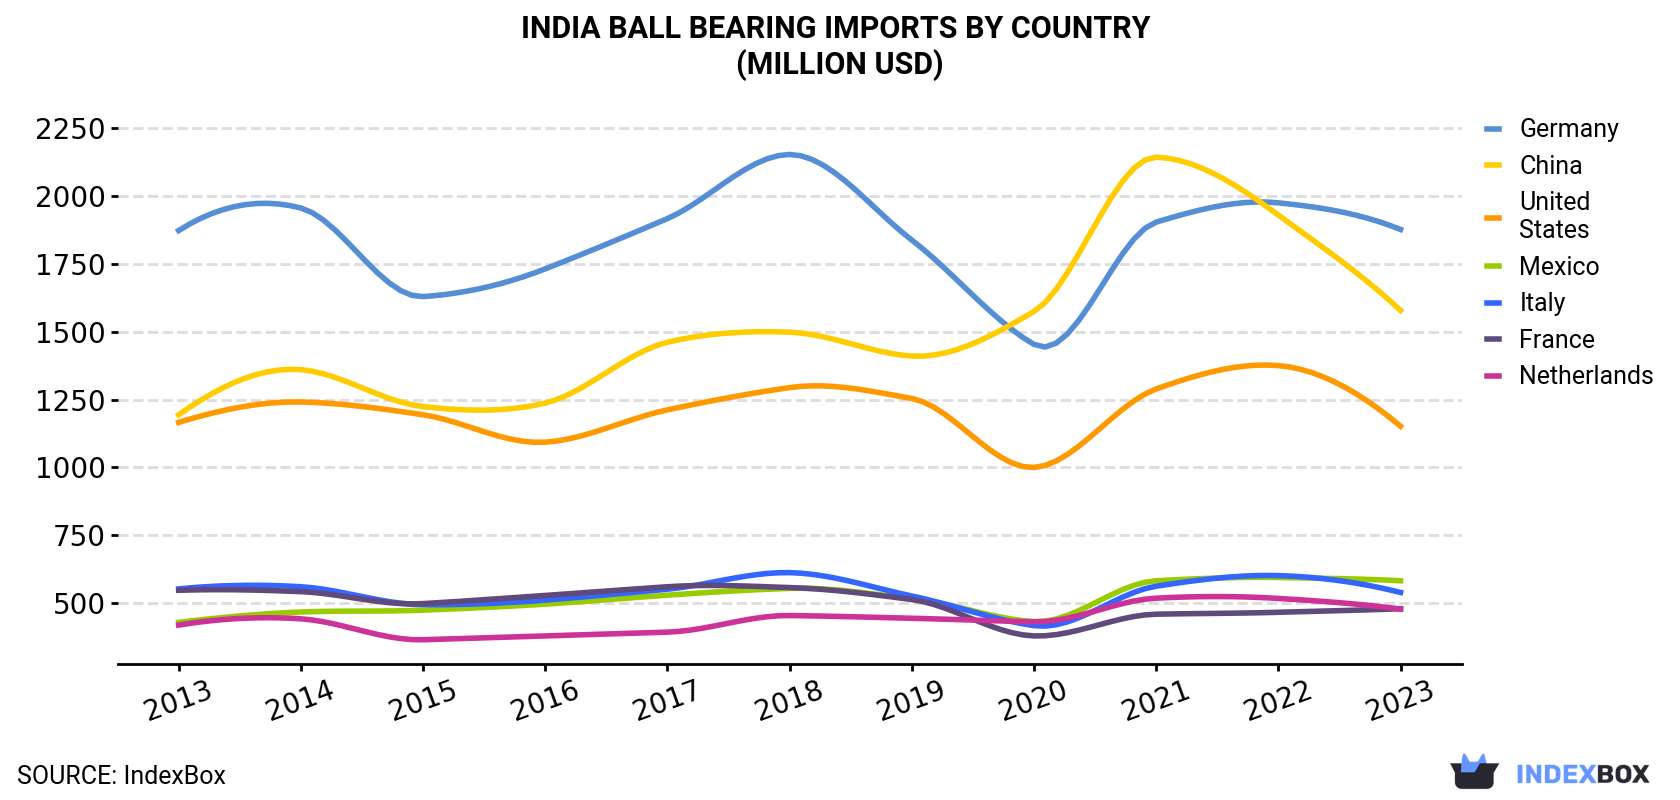 India Ball Bearing Imports By Country (Million USD)